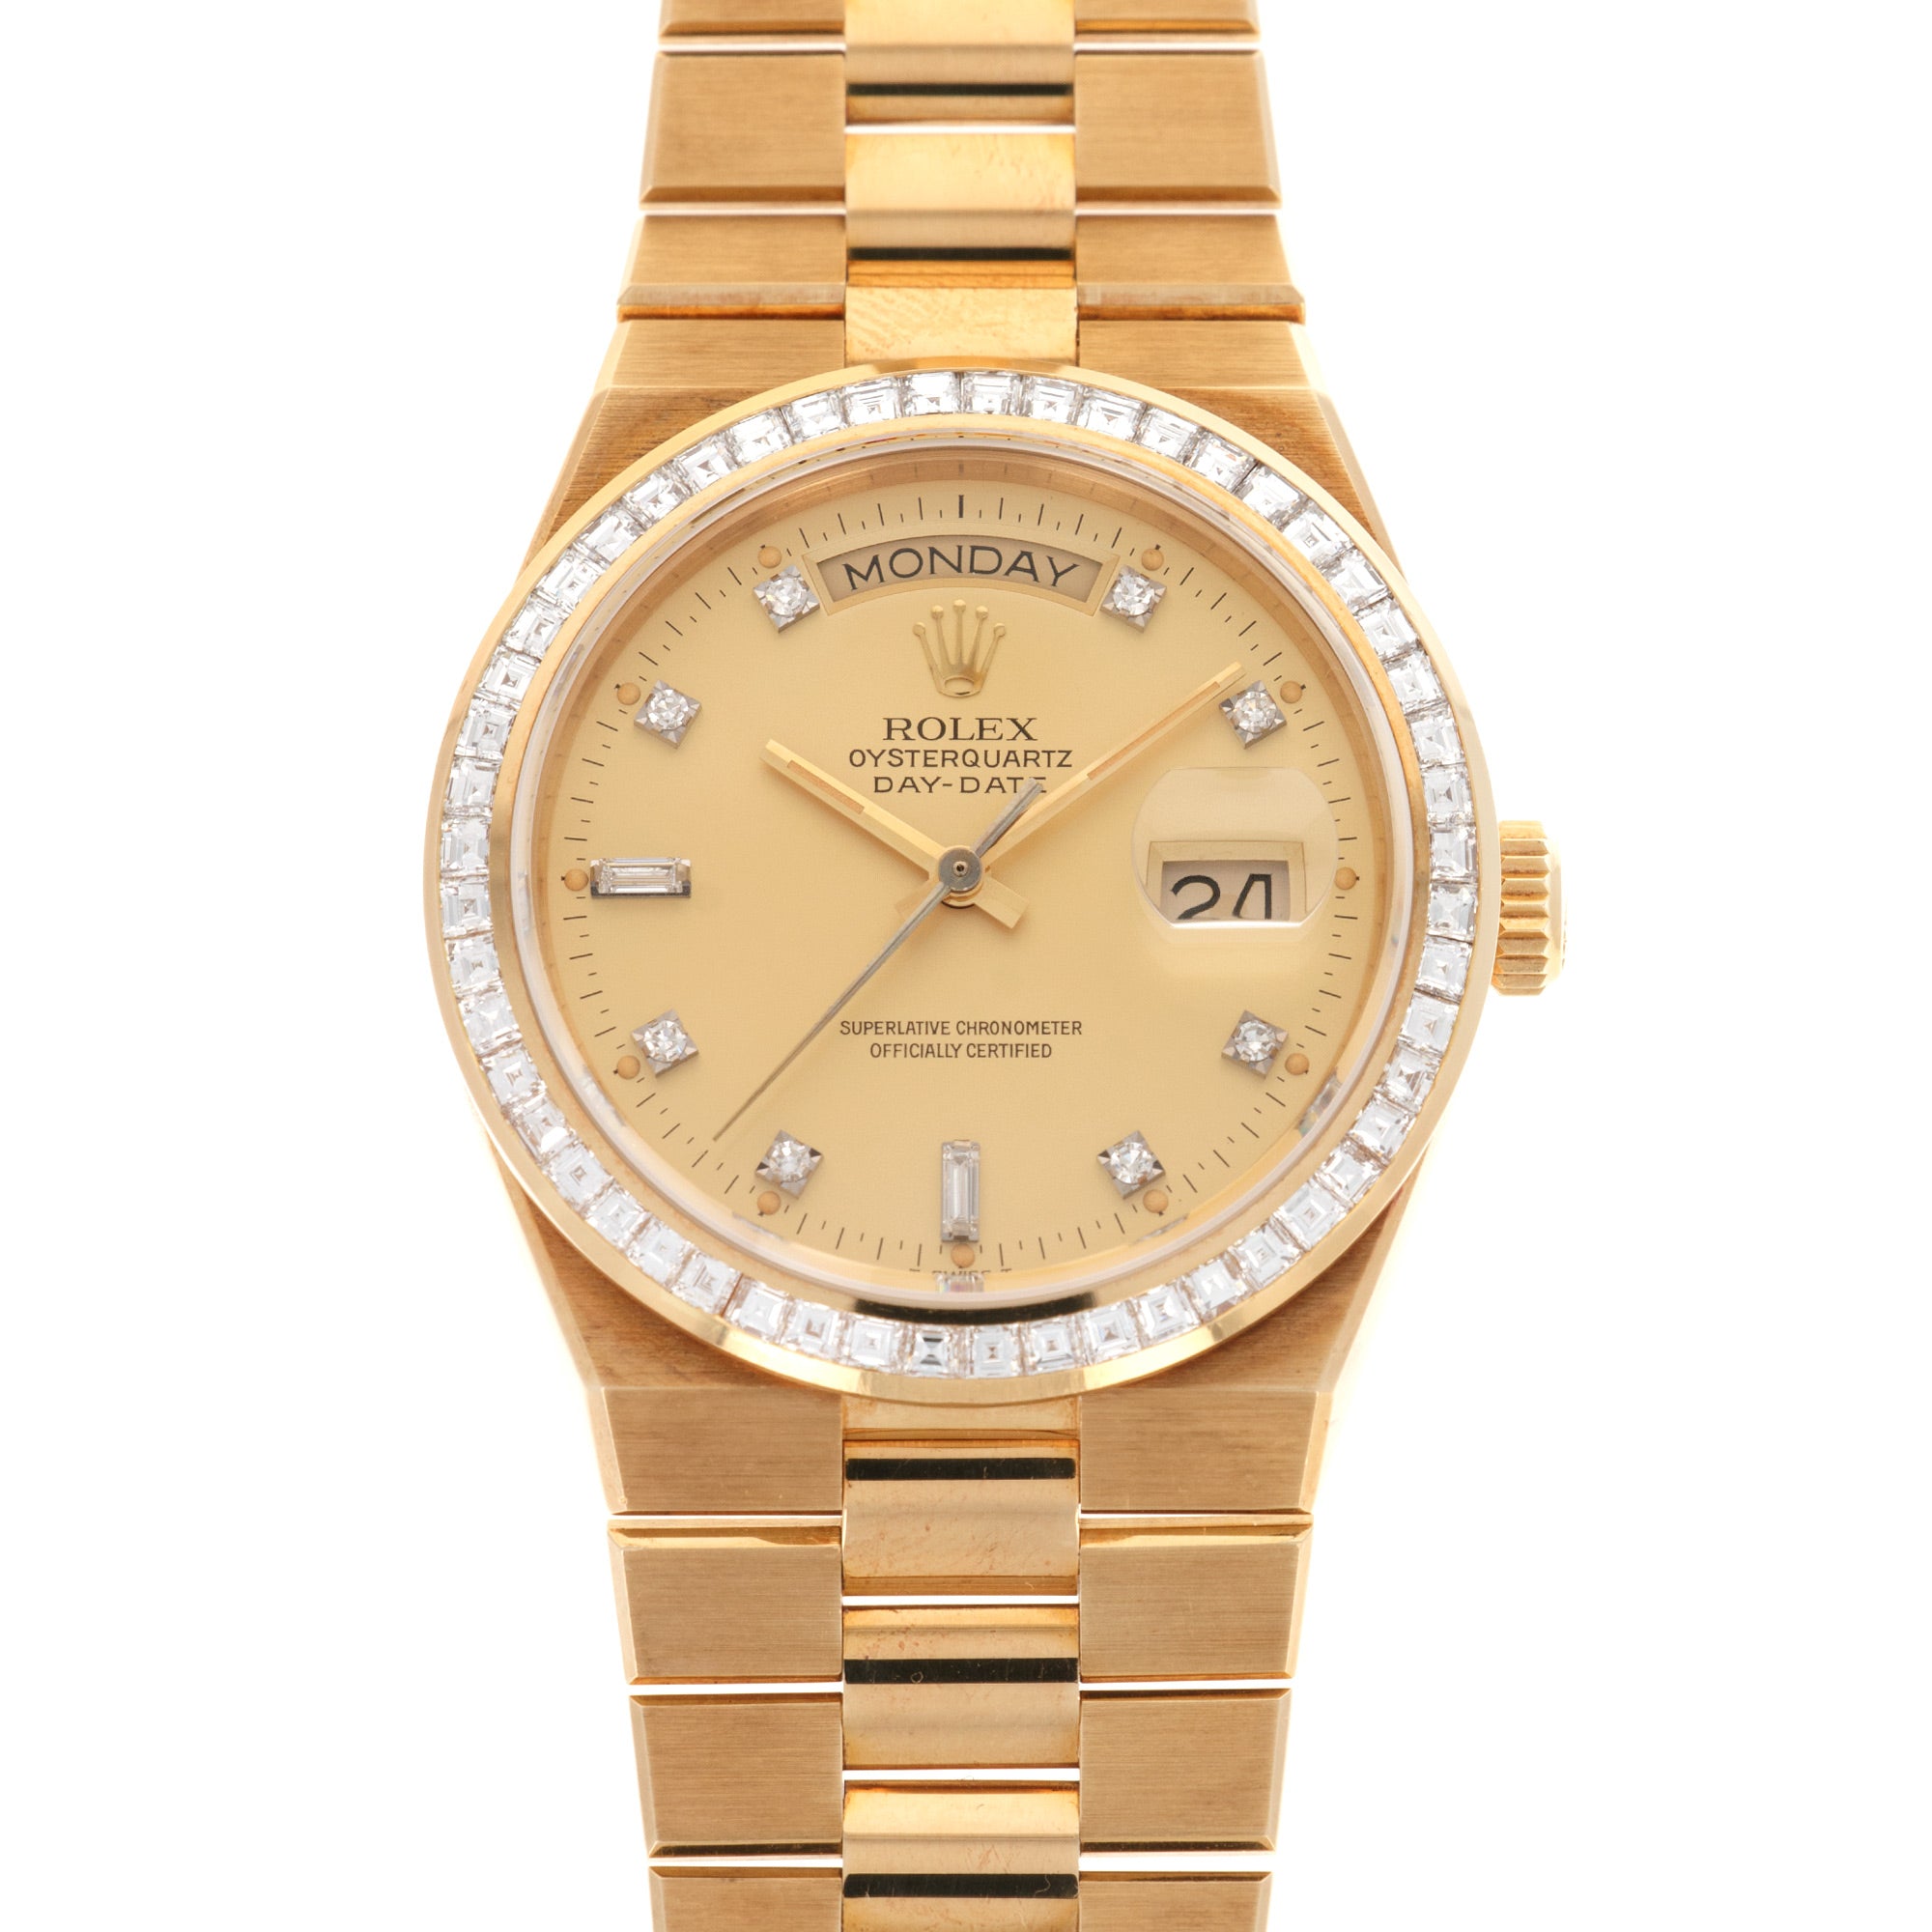 Rolex - Rolex Yellow Gold Day-Date Oysterquartz Diamond Watch Ref. 19058, Delivered to Saudi Arabian Oil Co. - The Keystone Watches